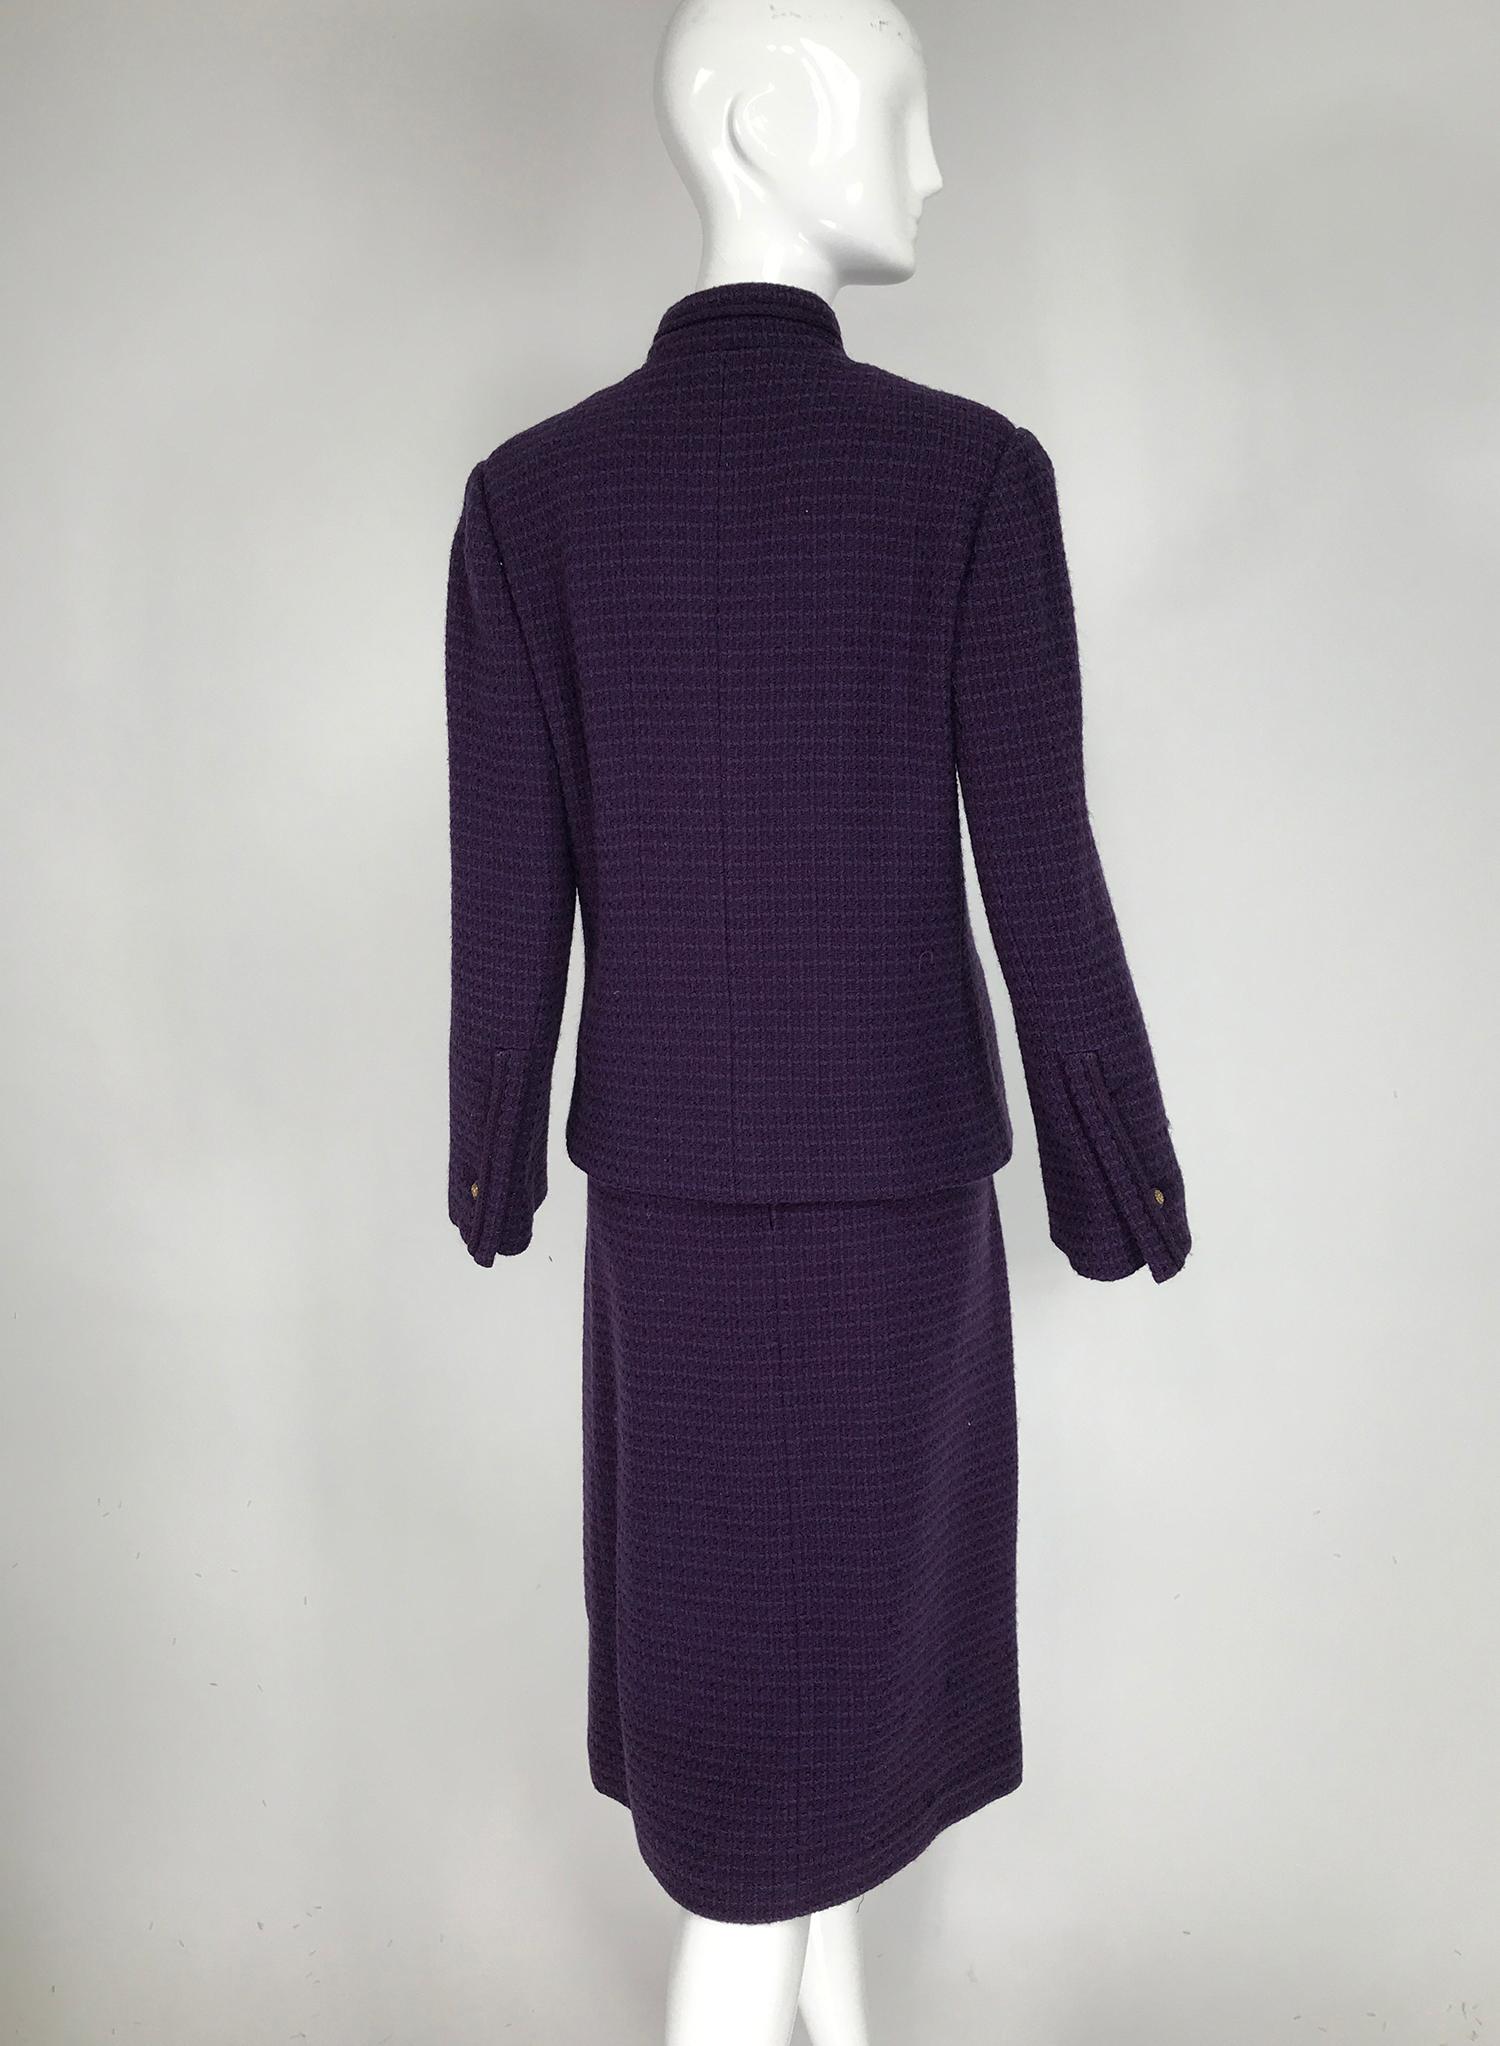 Women's Vintage Chanel Creations Textured Purple Wool Skirt Suit 1970s For Sale